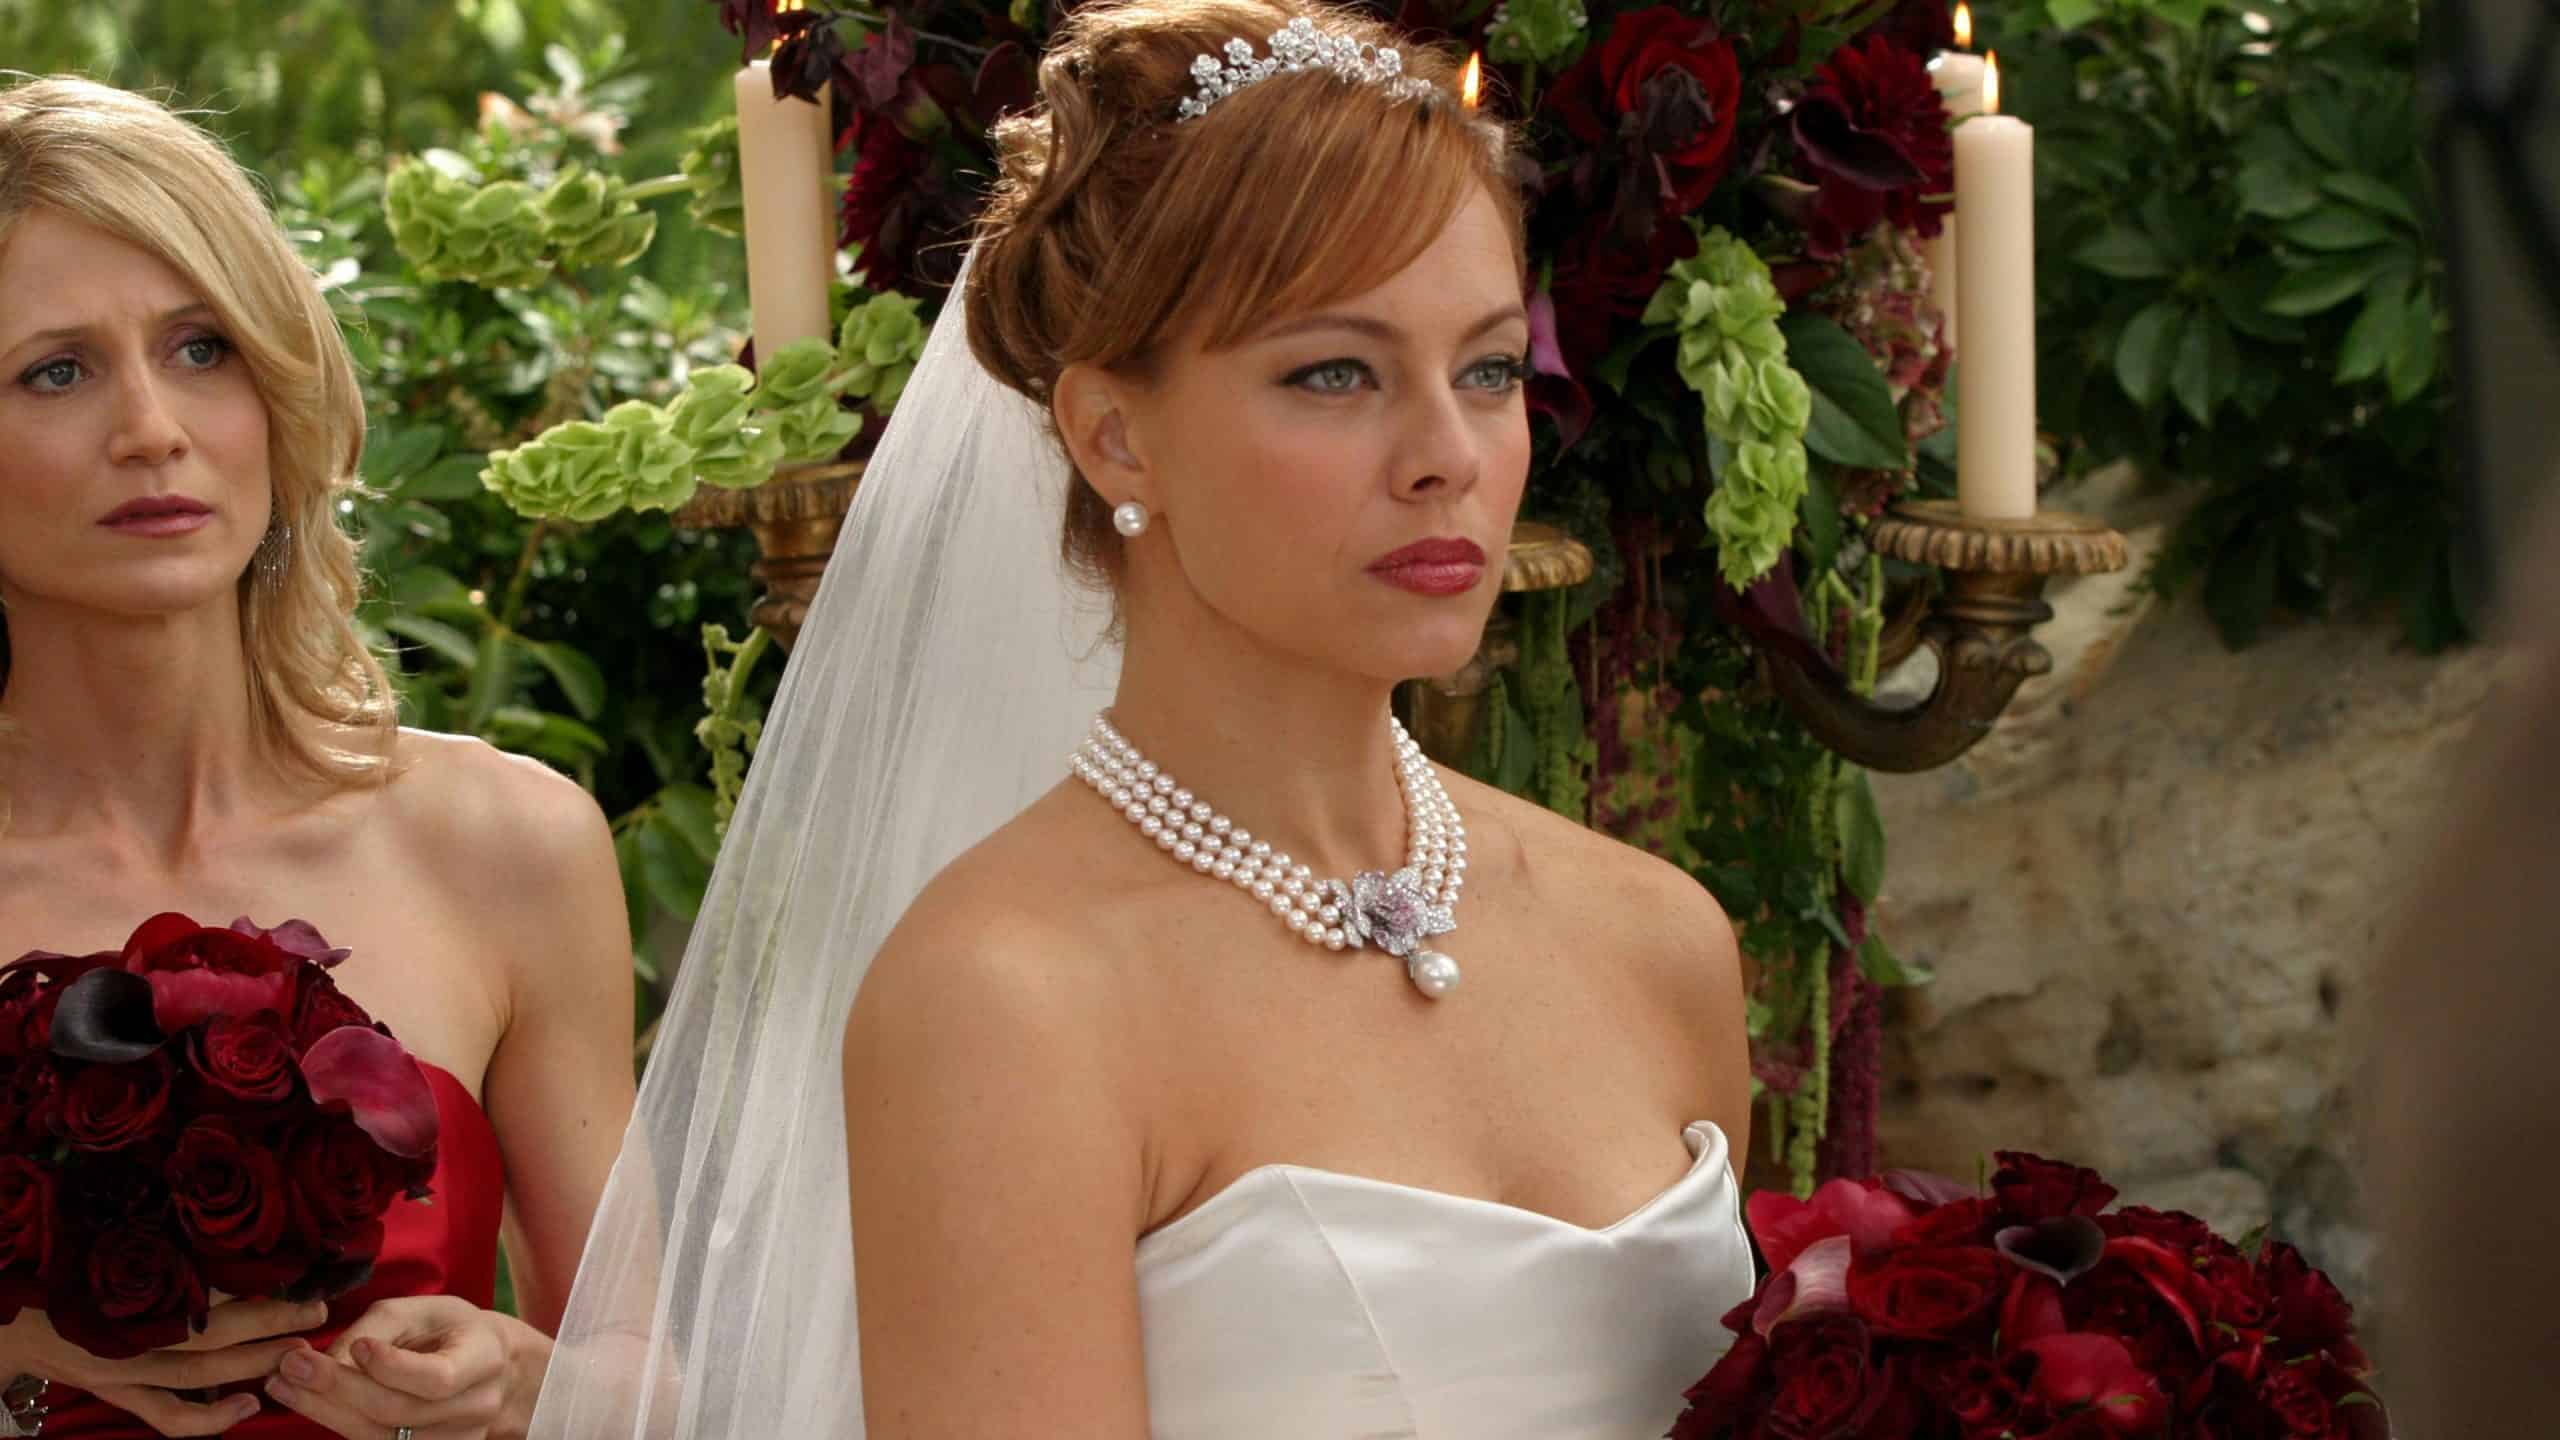 A woman holding flowers stands behind a bride in this image from Warner Bros. Studios.